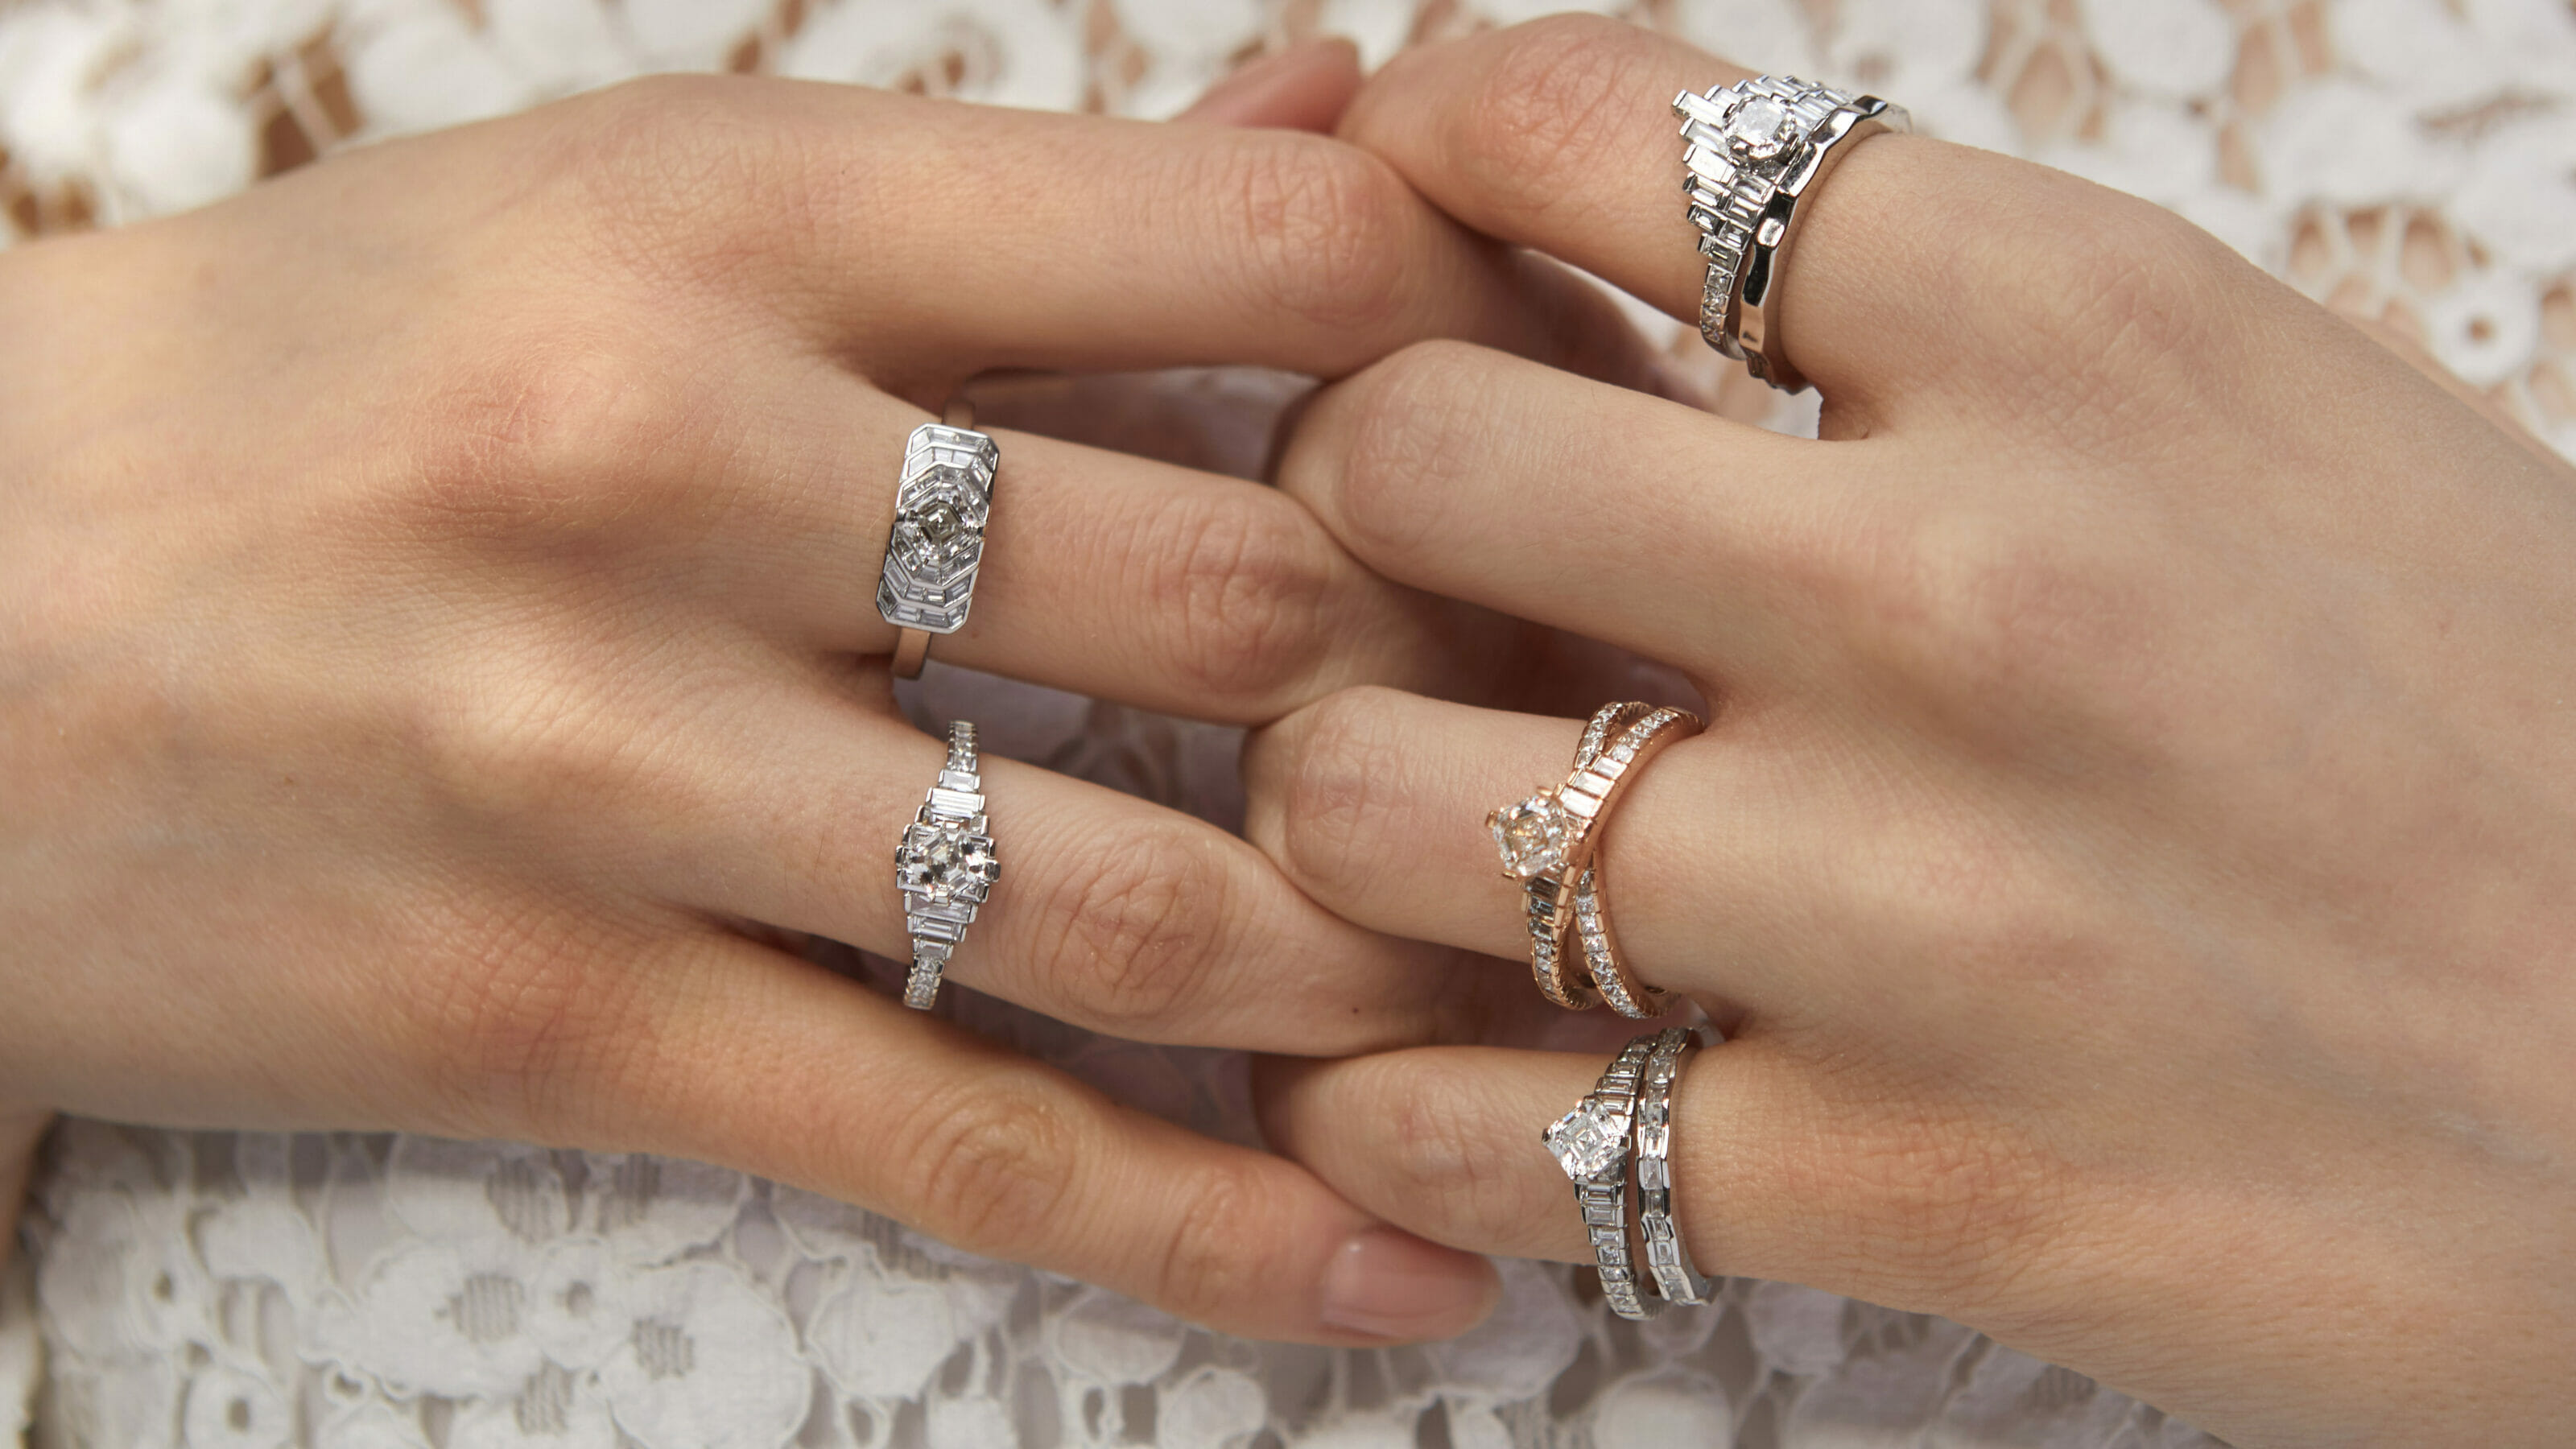 Buying a Designer Engagement Ring Online, Which is Right for Me?